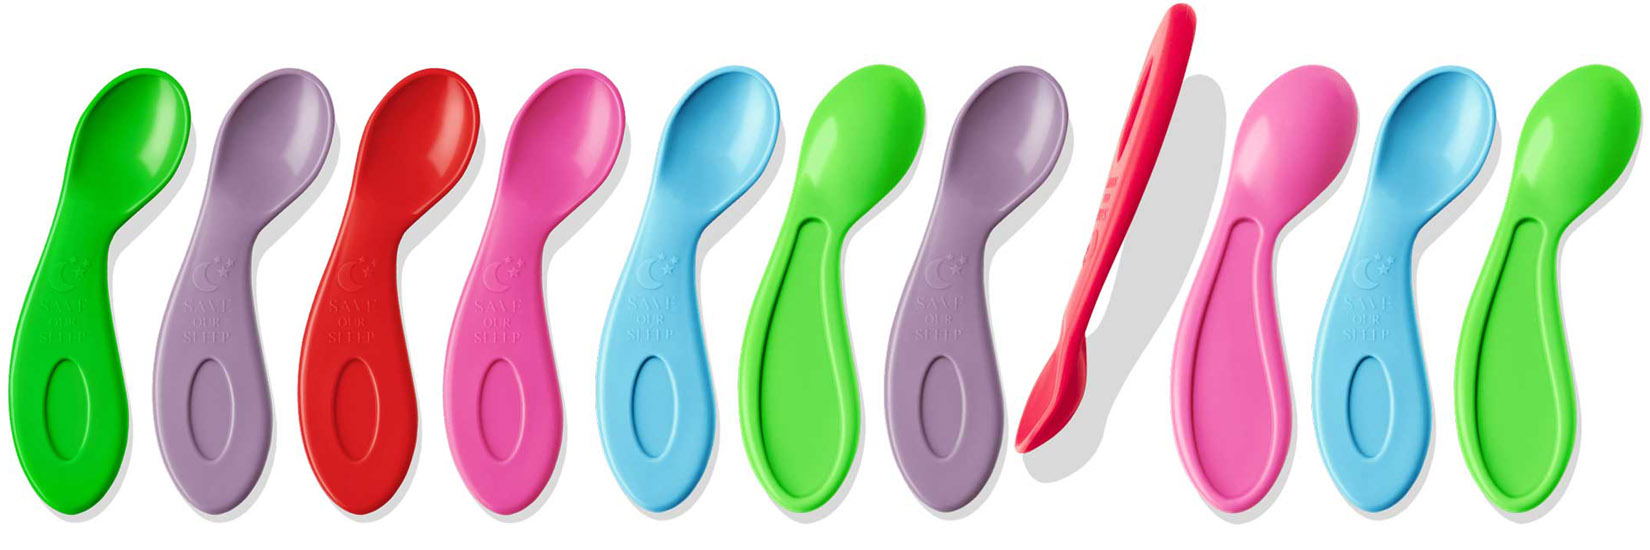 Save Our Sleep baby spoons